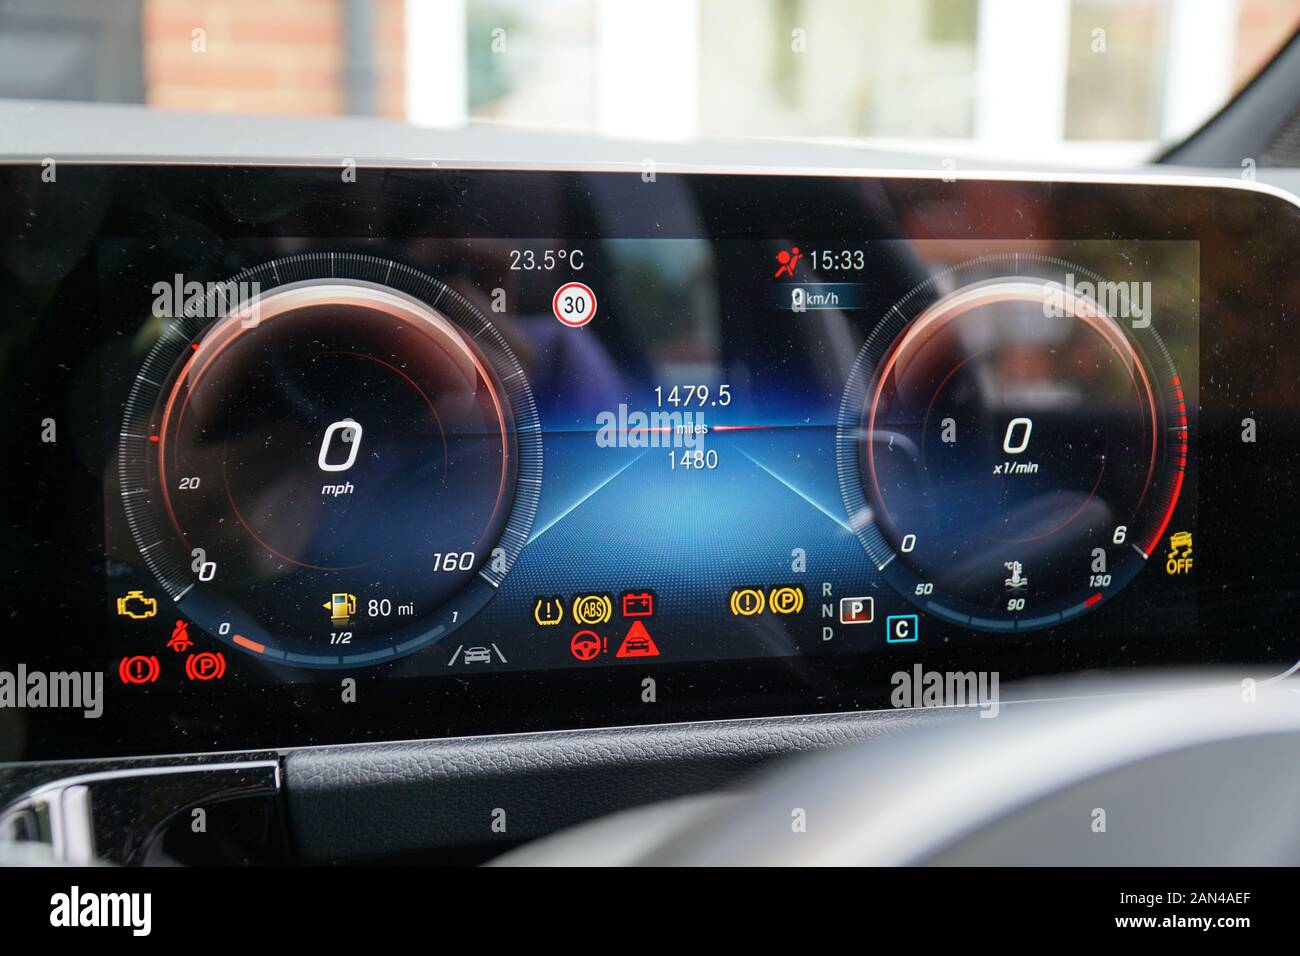 Warning lights on digital driver's display in the interior of a W247 Mercedes-Benz B-Class Stock Photo